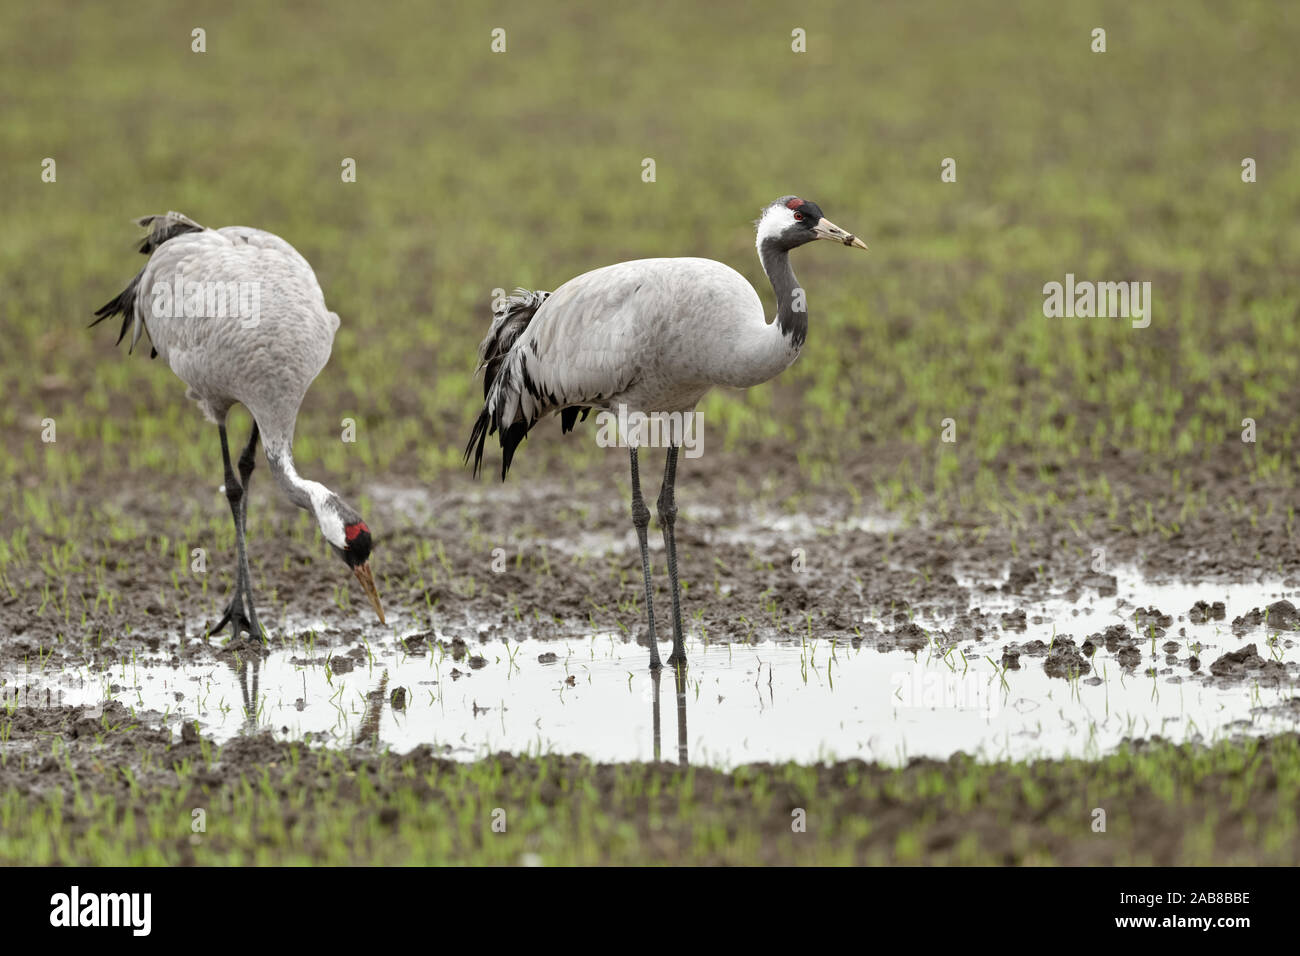 Common Cranes / Graukraniche ( Grus grus ), couple, pair, resting on farmland, drinking water, searching for food, during autumn migration, wildlife, Stock Photo